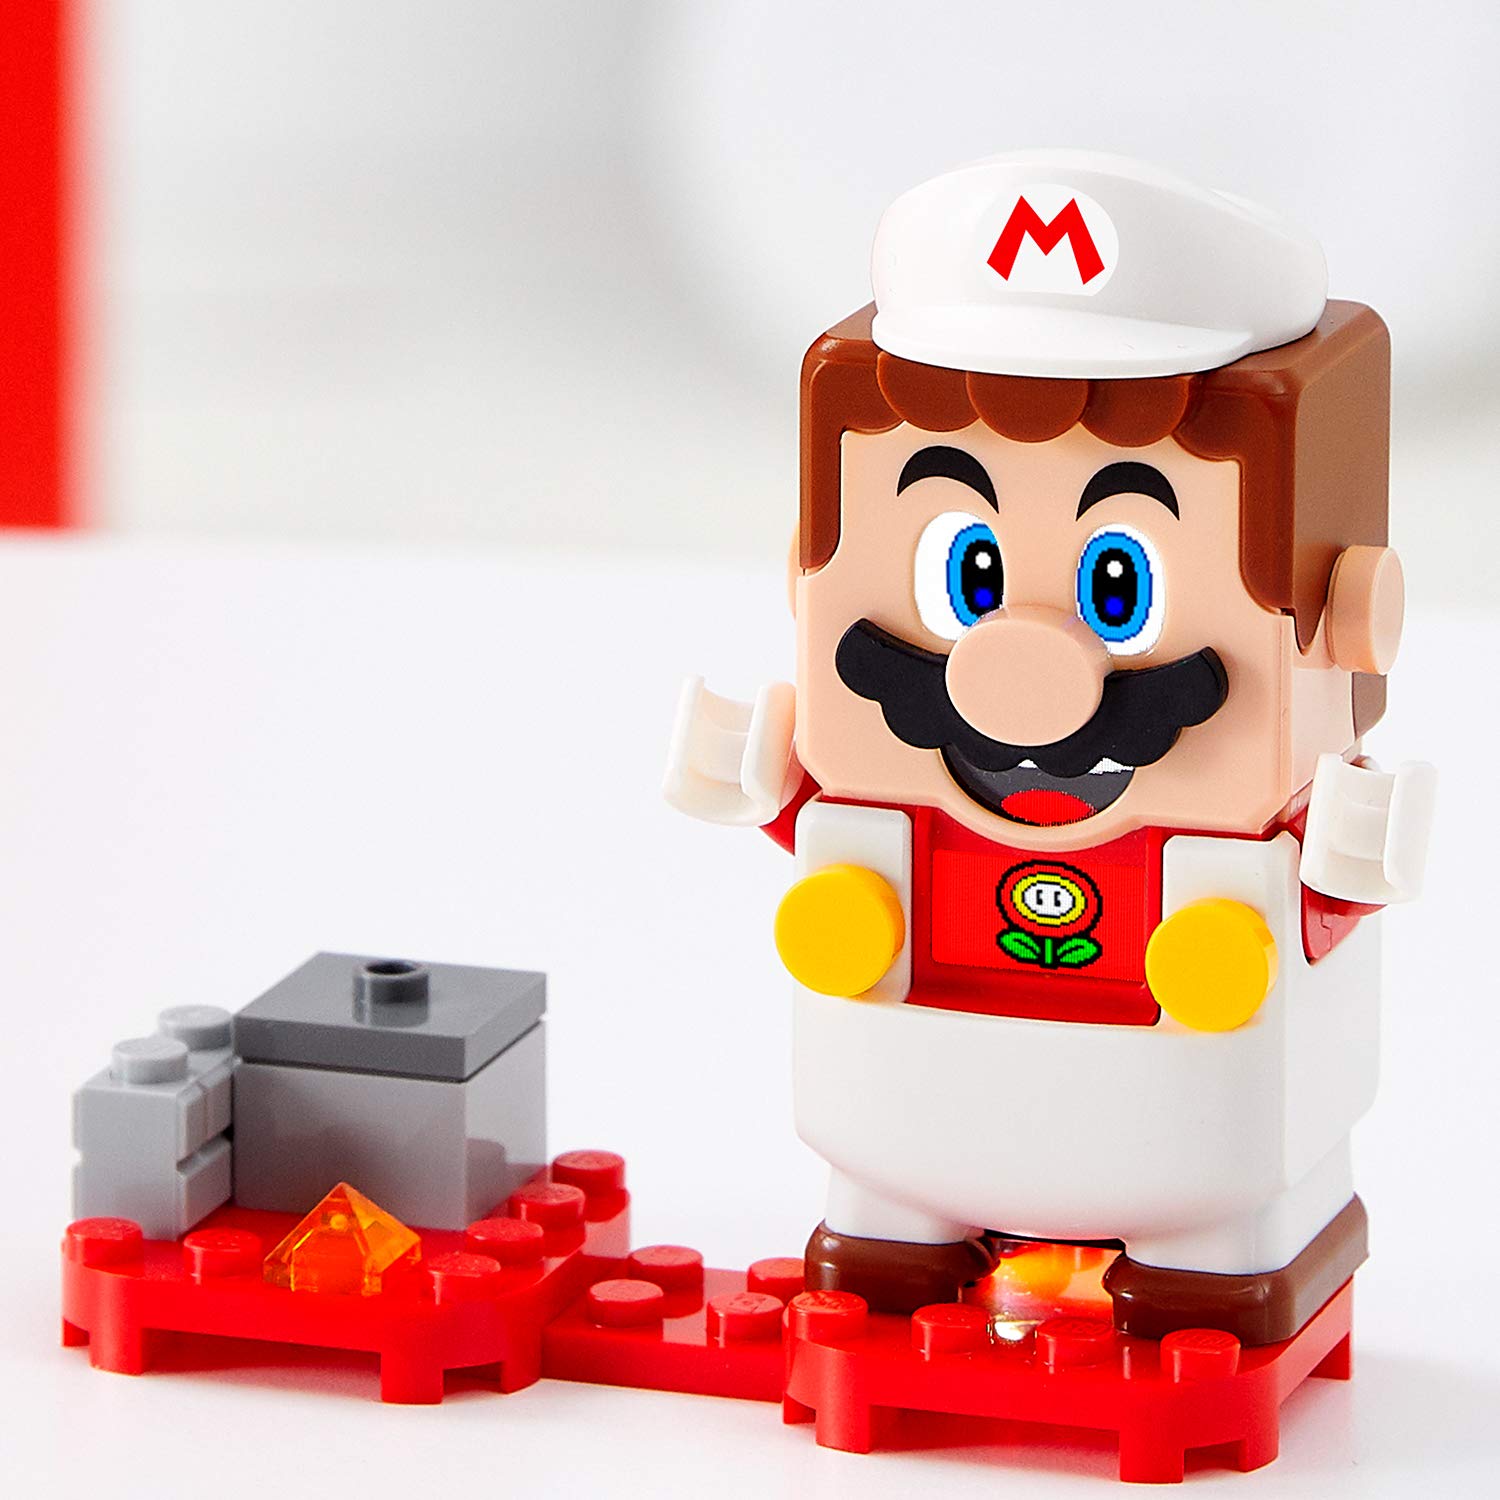 LEGO Super Mario Fire Mario Power-Up Pack 71370; Building Kit for Creative Kids to Power Up The Mario Figure in The Adventures with Mario Starter Course (71360) Playset (11 Pieces)